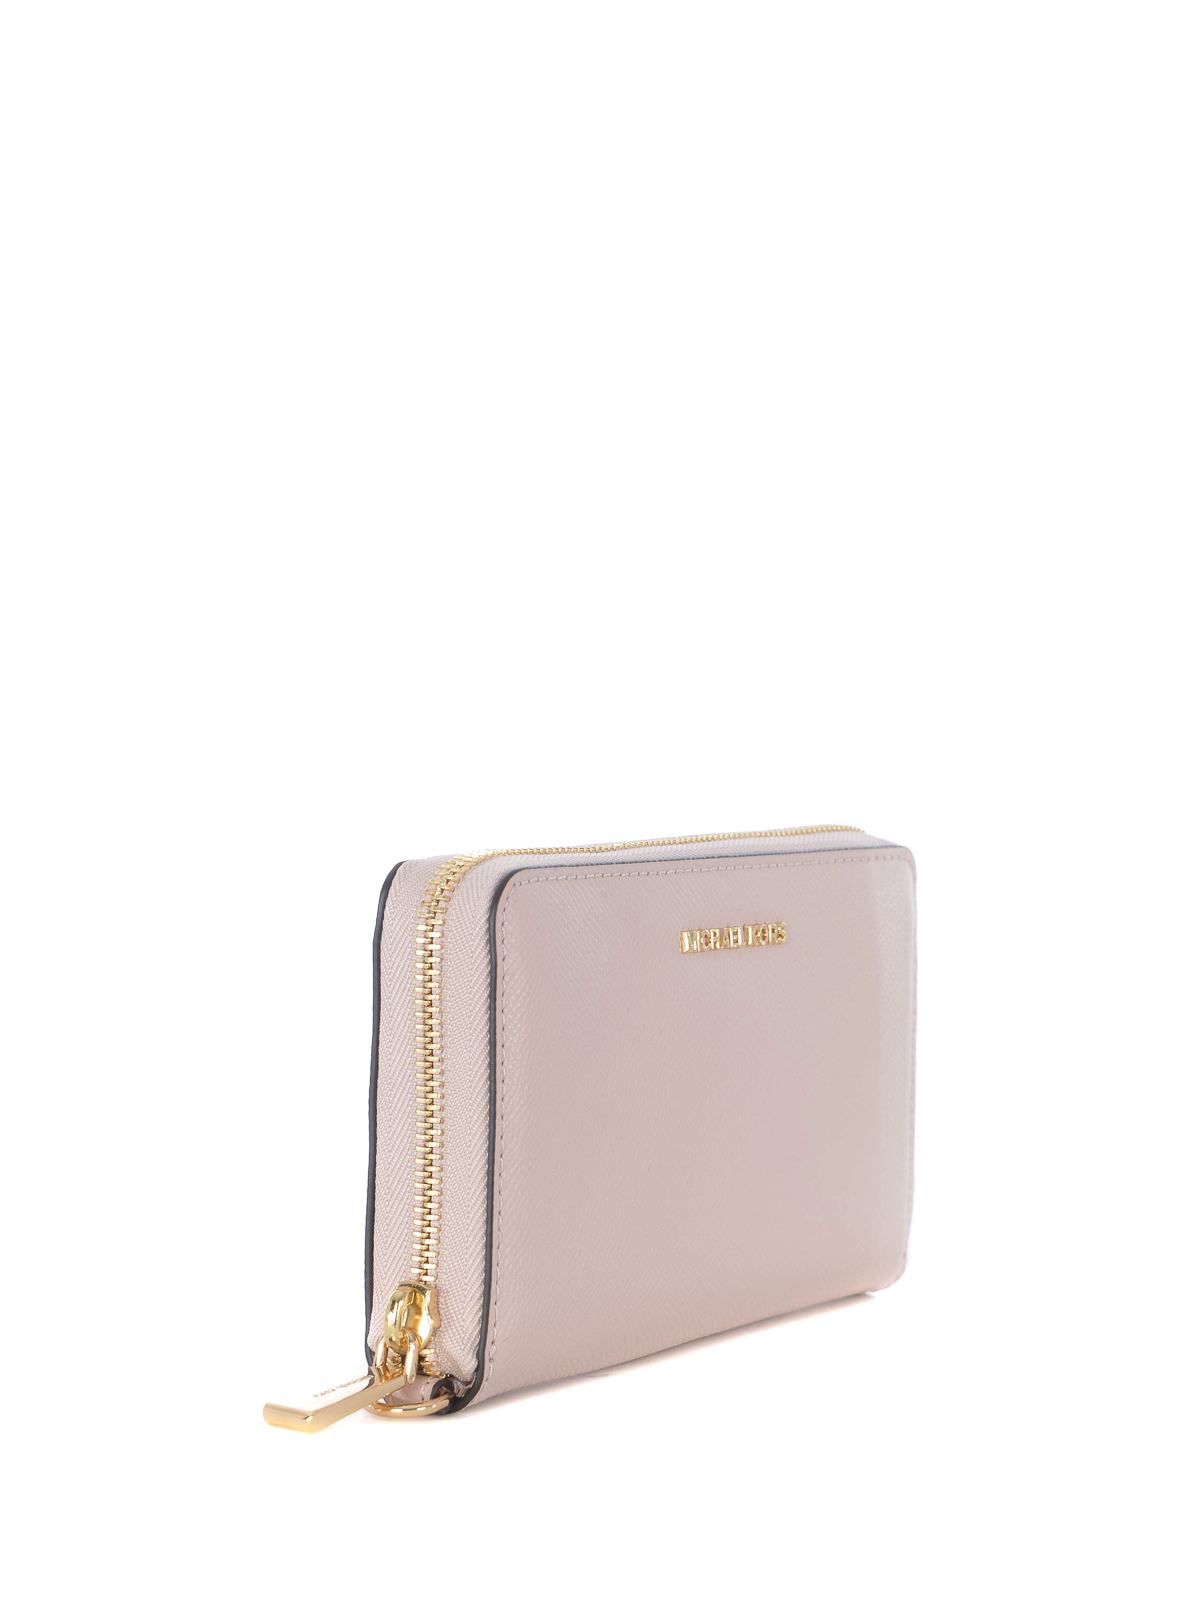 light pink leather wallet - wallets 